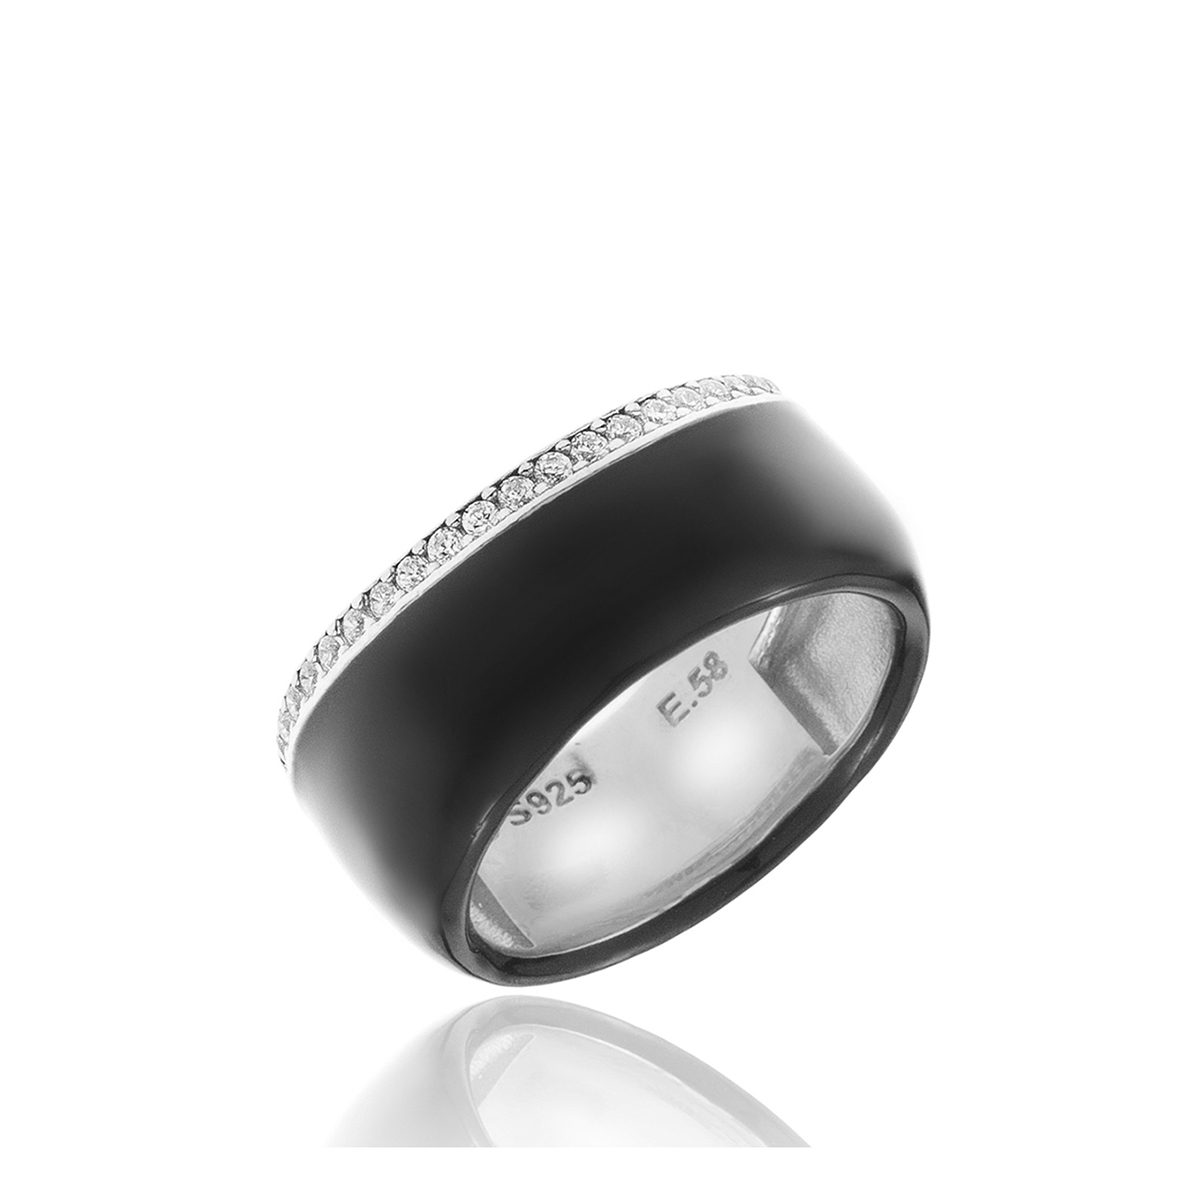 Ring-silver-925-rhodium-plated-with-zirconia-and-enamel